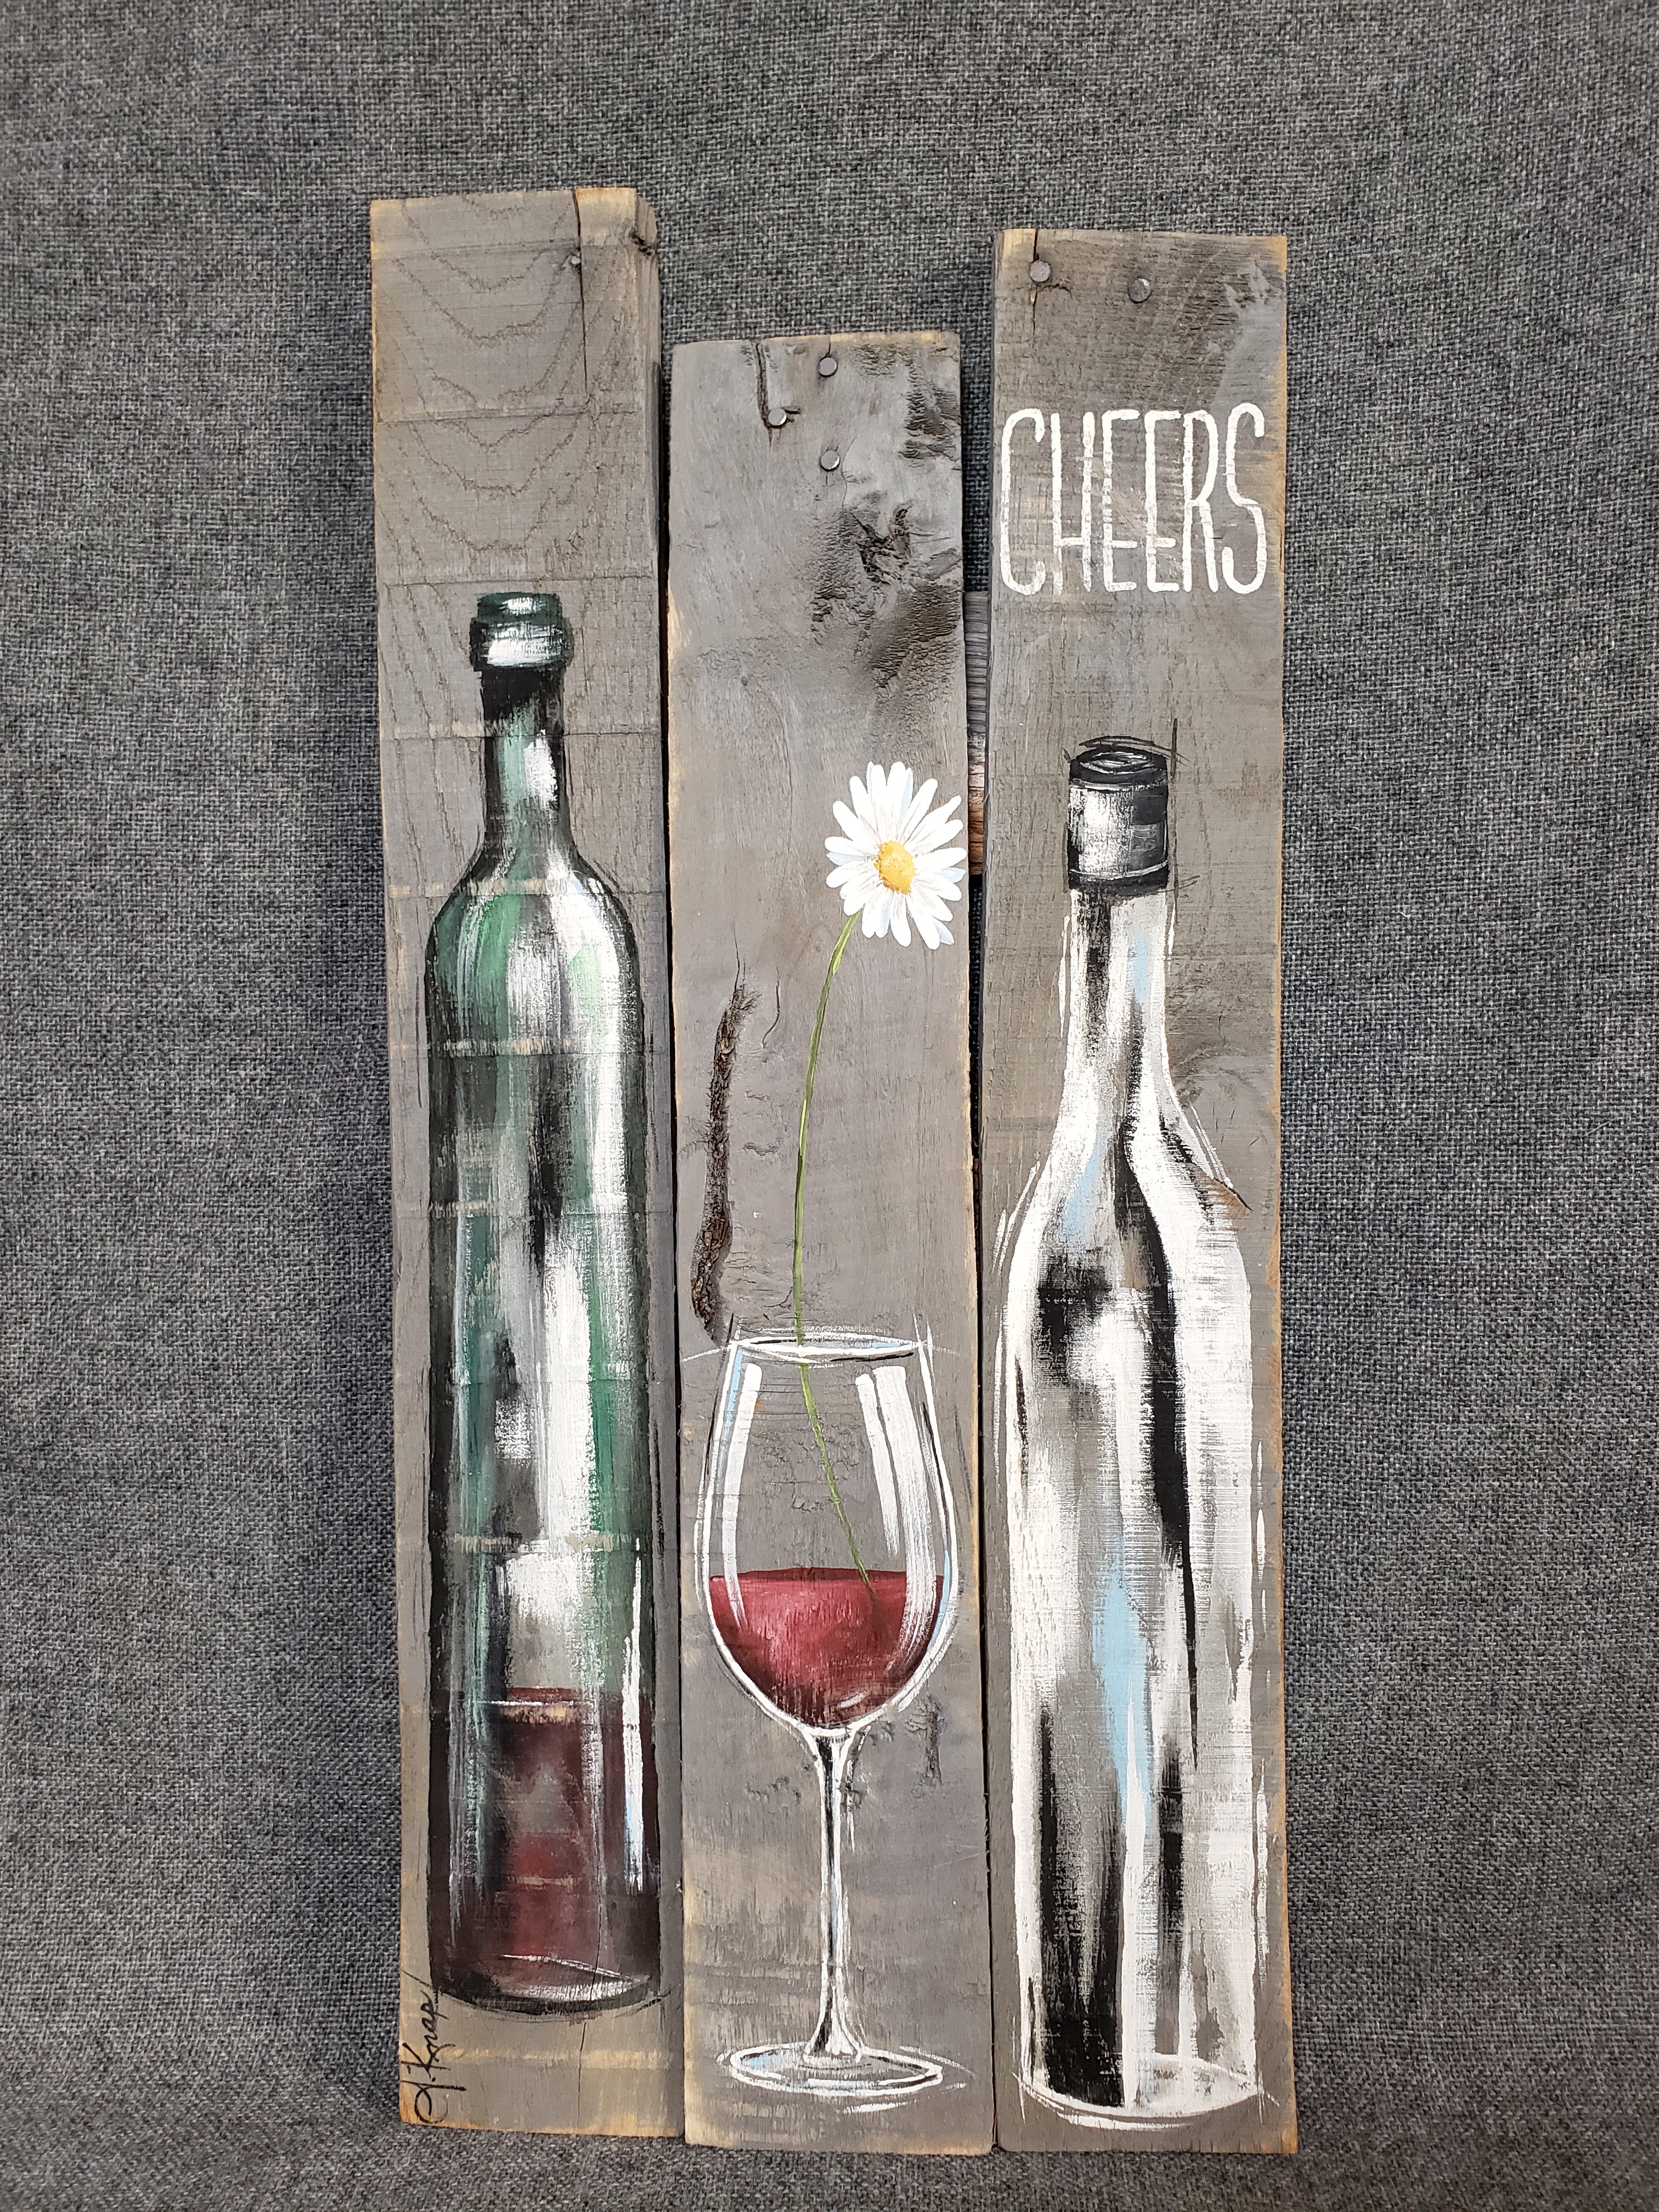 Wine bottle hand painted pallet art, wine lover gift, cheers word art, rustic farmhouse decor